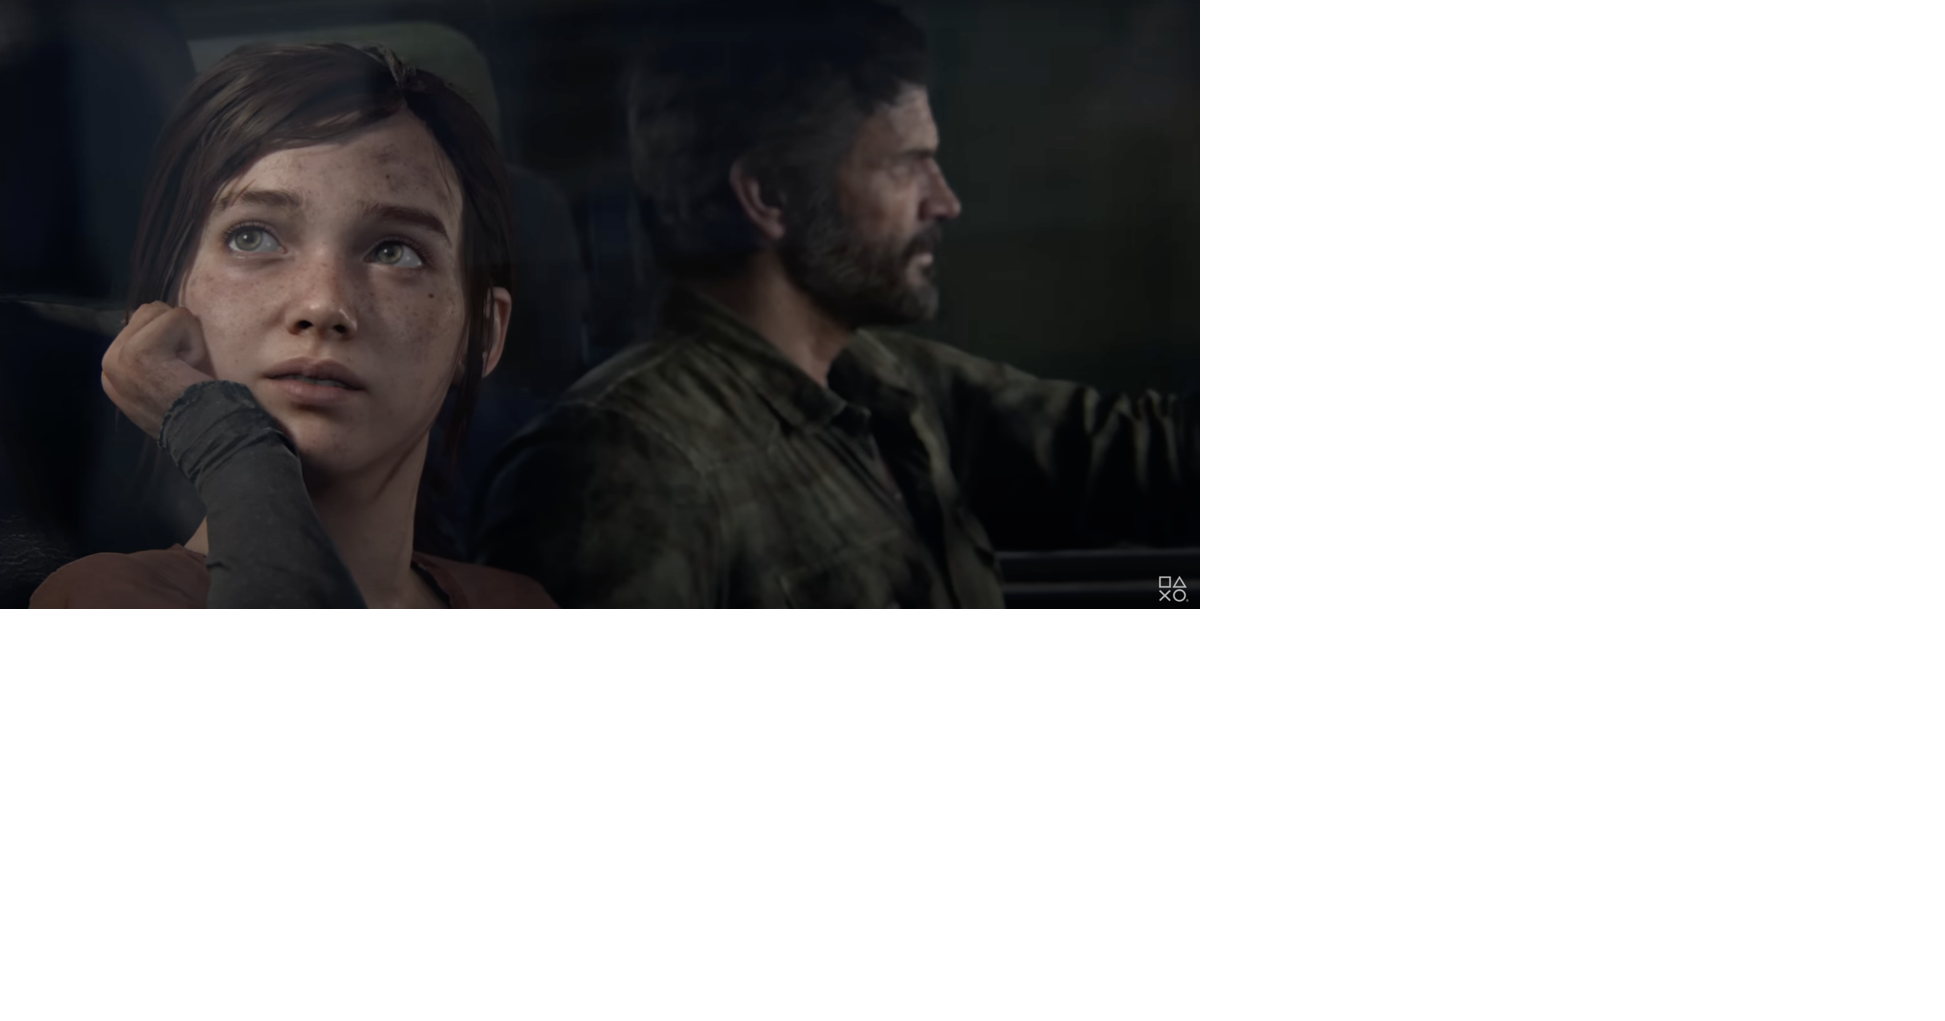 The Last of Us review – earns every ounce of praise